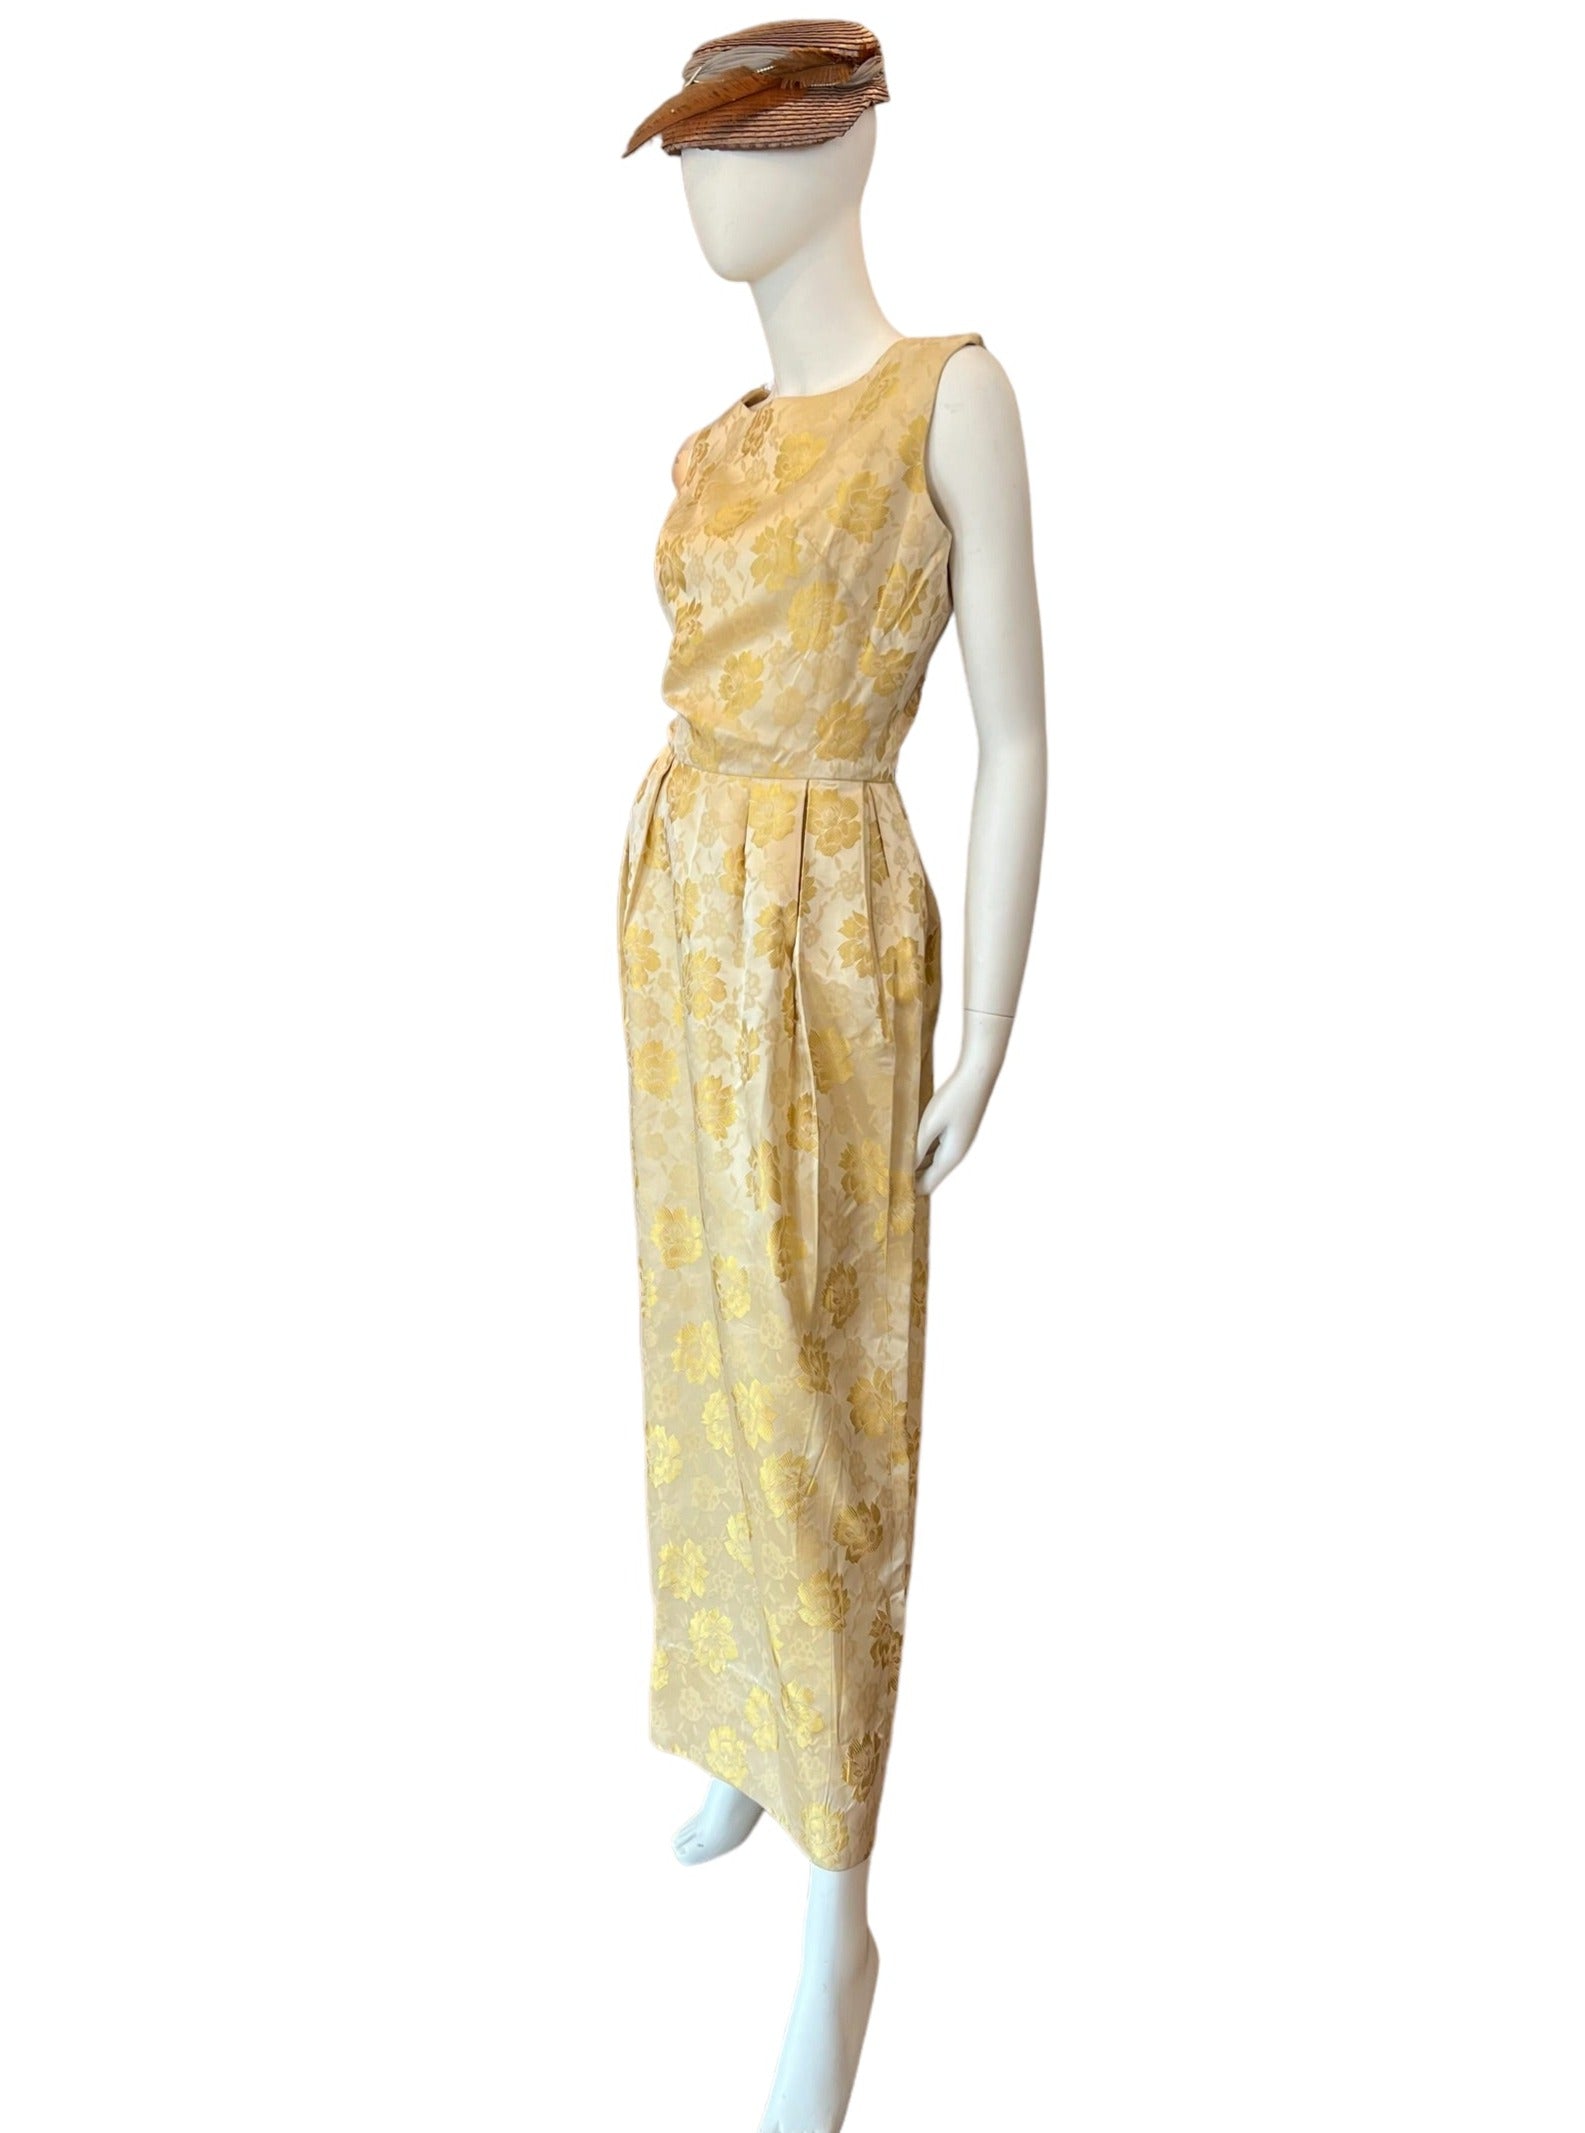 50's style vintage glamour gown - gold taffeta fitted dress hand-made one of a kind stunner